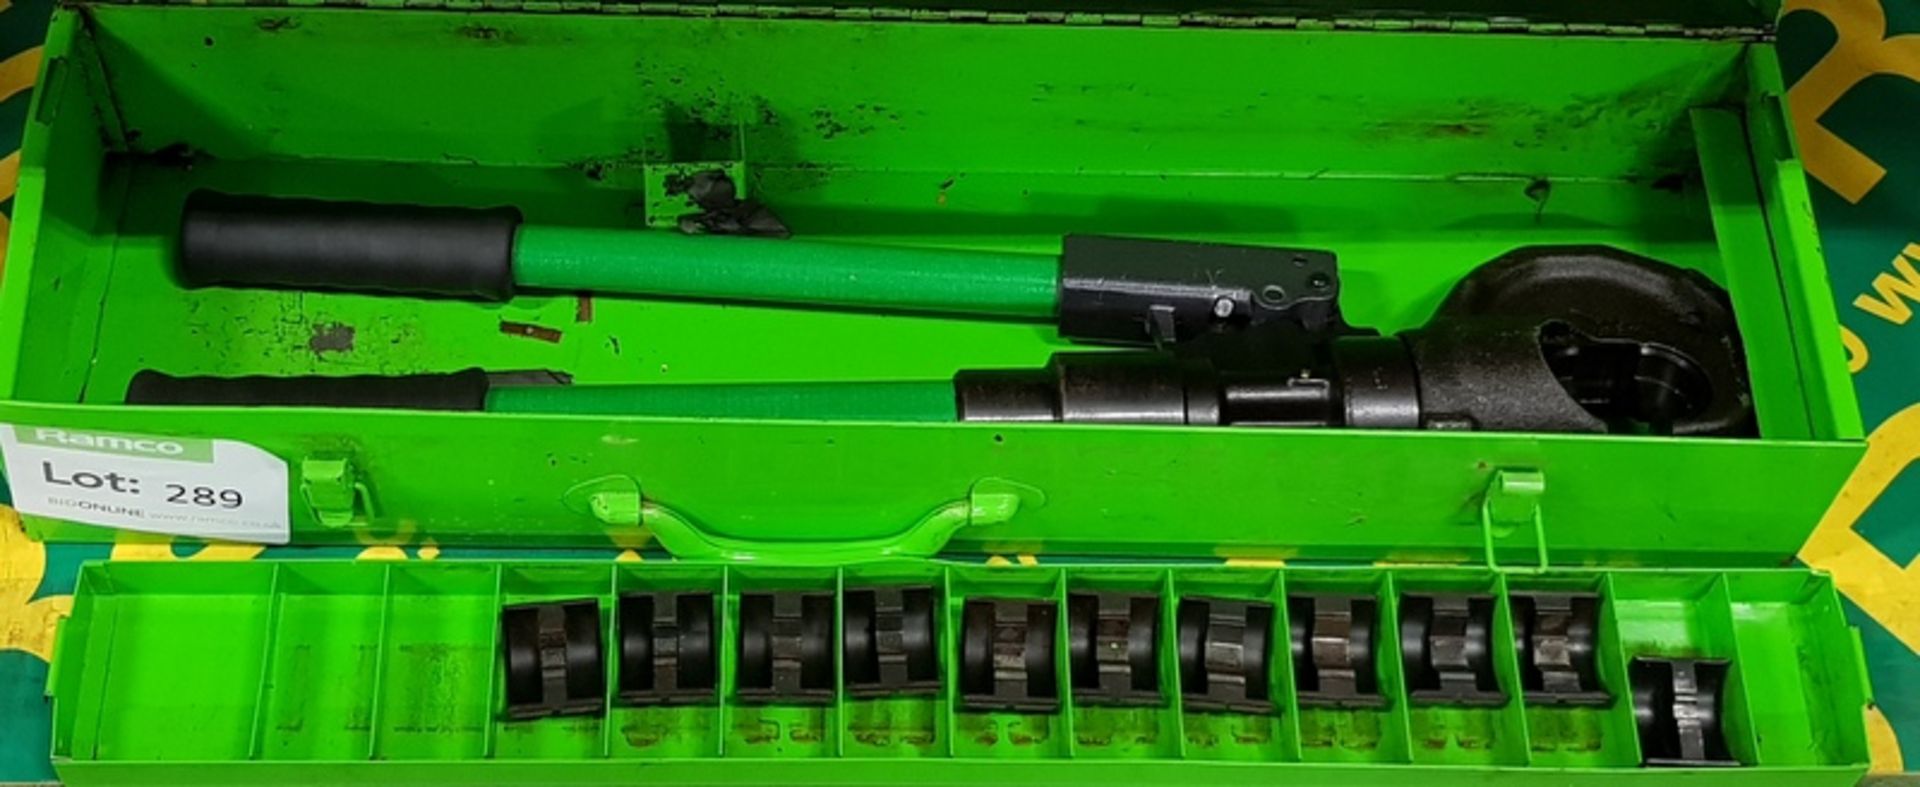 Heavy Duty Crimping Tool in metal carry case